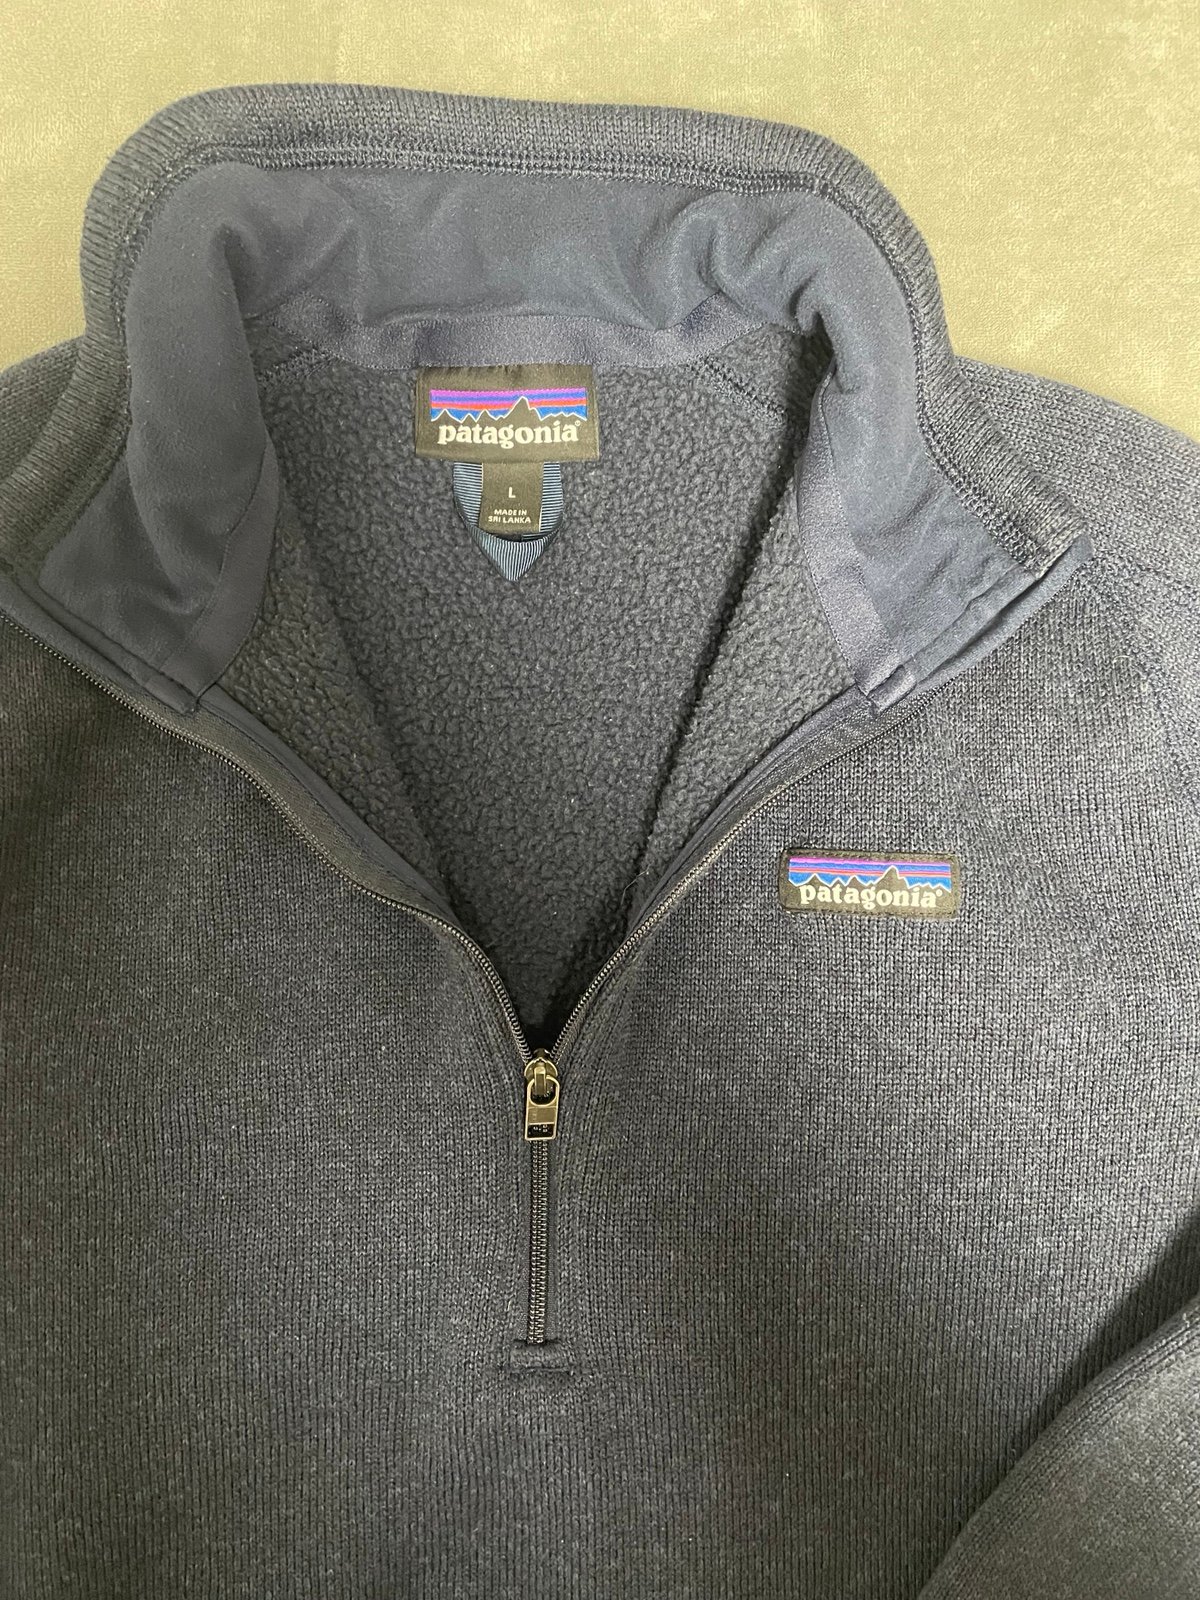 good price Patagonia better sweater pullover mrbQqszOE for sale